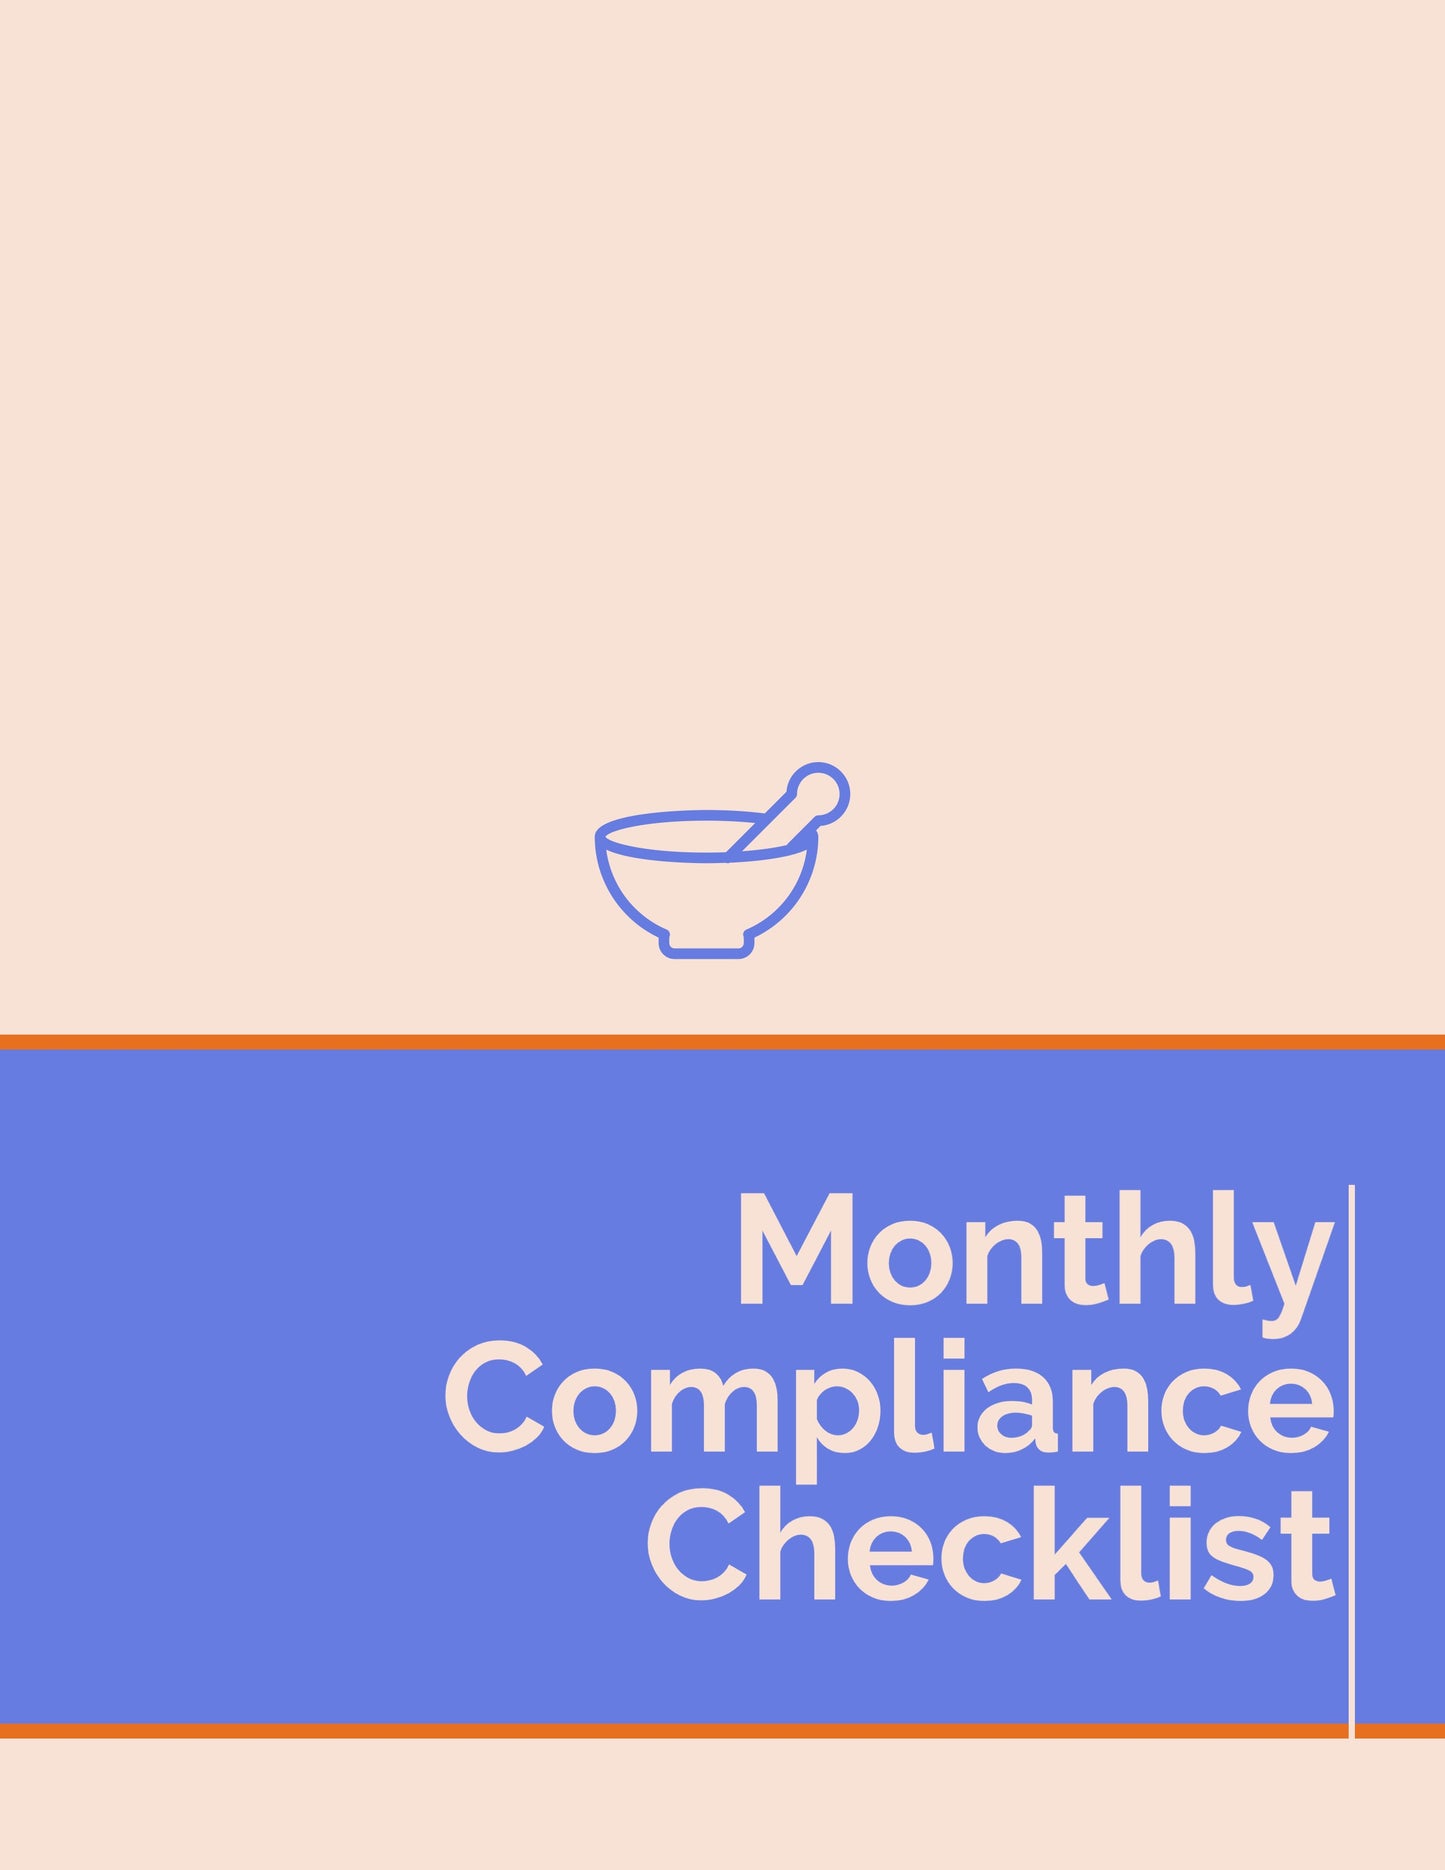 Manual Monthly Compliance Checklist